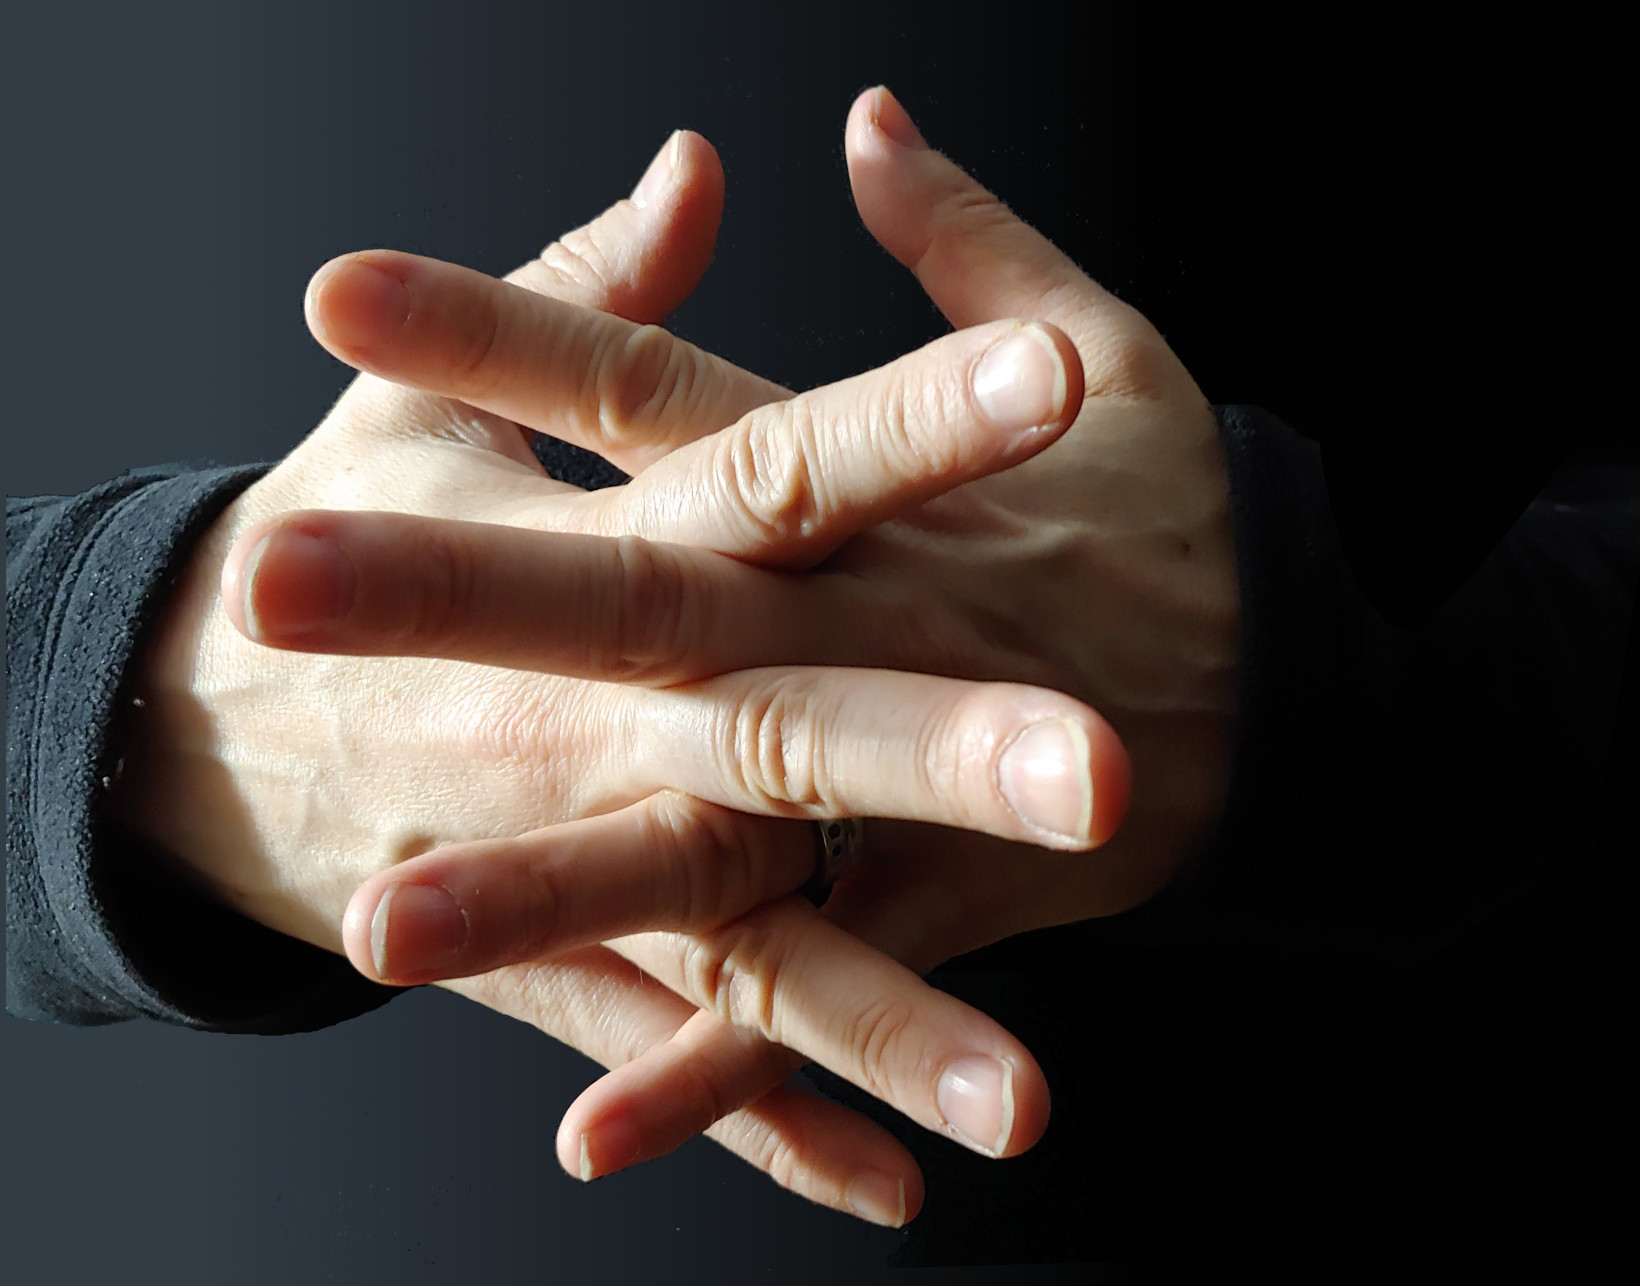 pair of hands with fingers interleaved, at cross angles